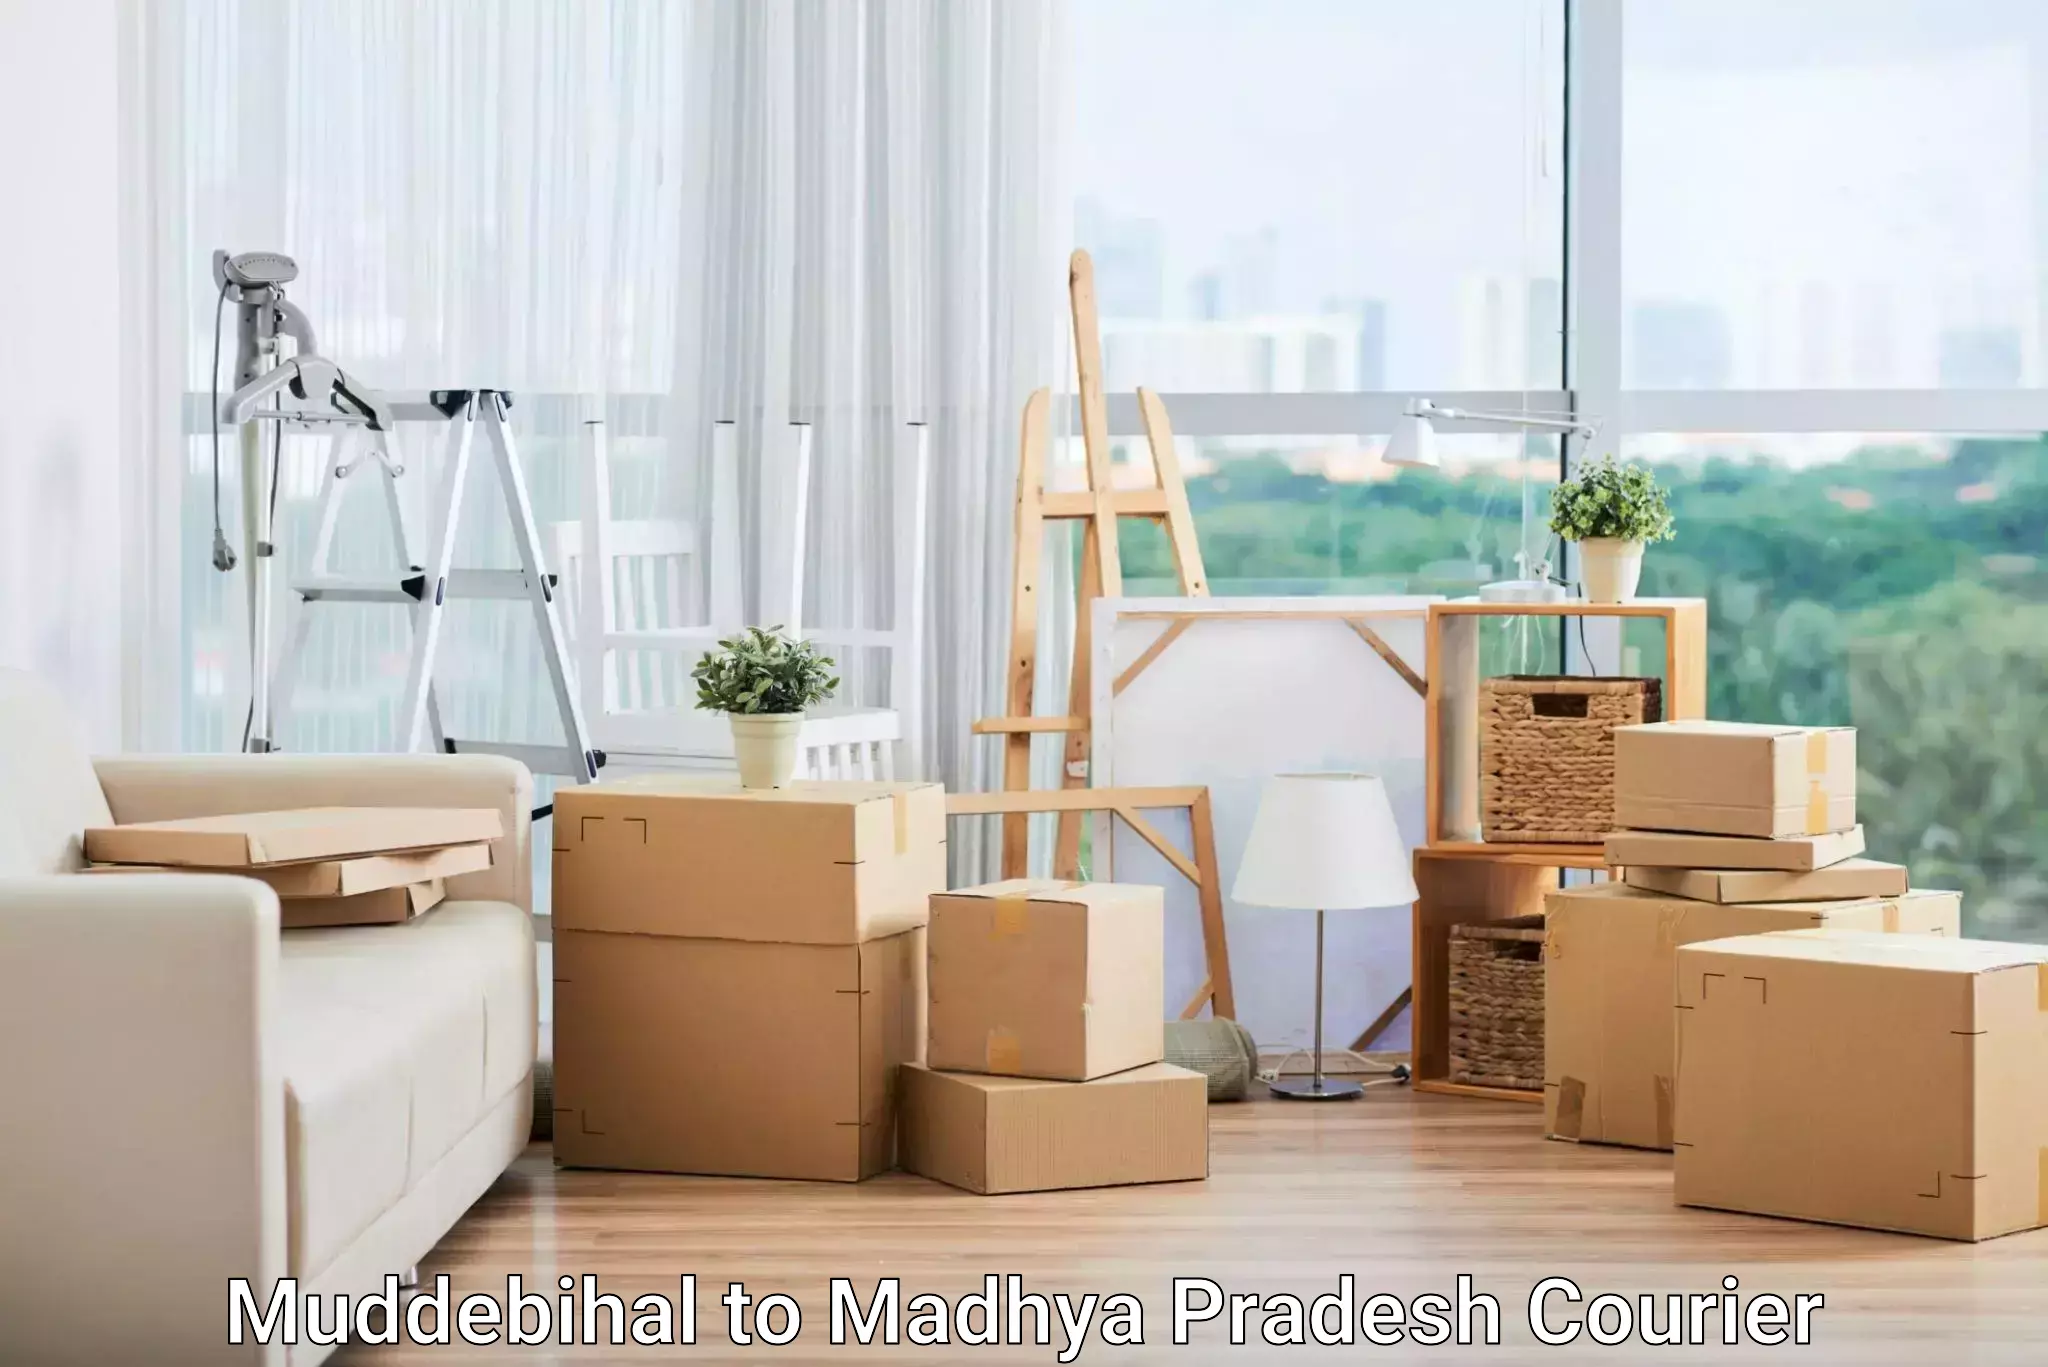 Cost-effective shipping solutions in Muddebihal to Raipur Karchuliyan